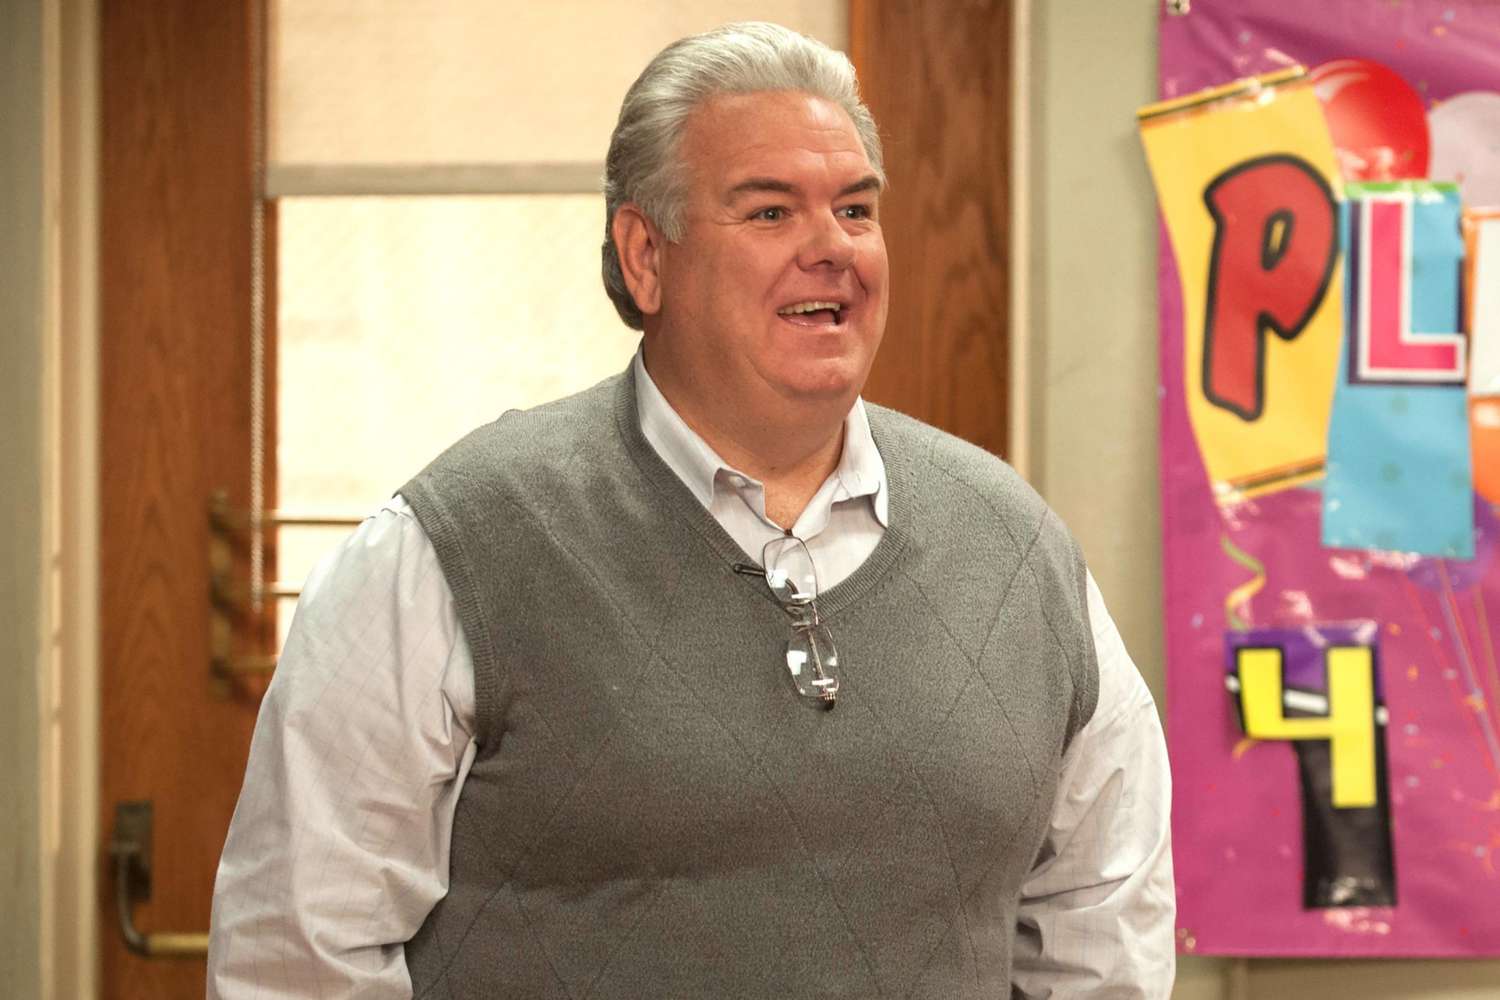 O’Heir as the man with many names in ‘Parks and Rec’